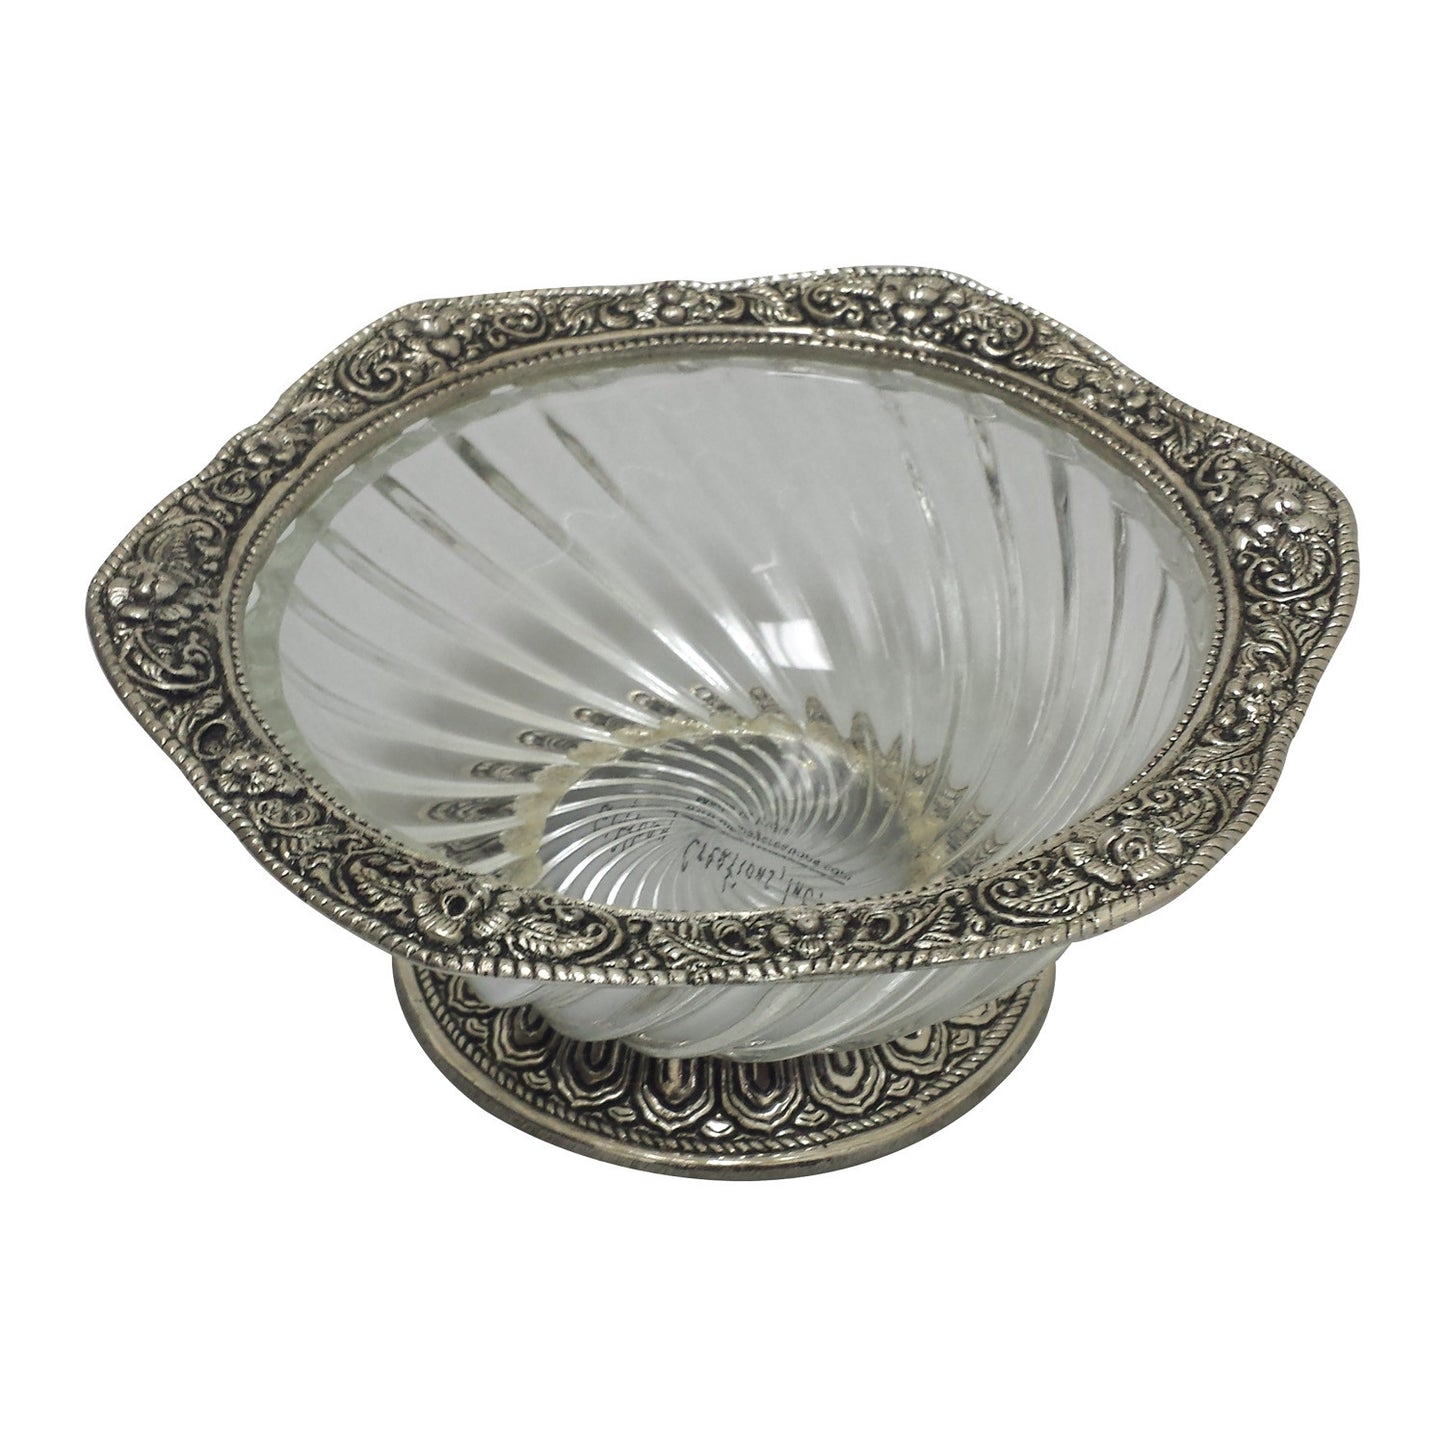 GiftBay 634 Beautiful Serving Dish with Antique Silver Finish Trim,6" Length